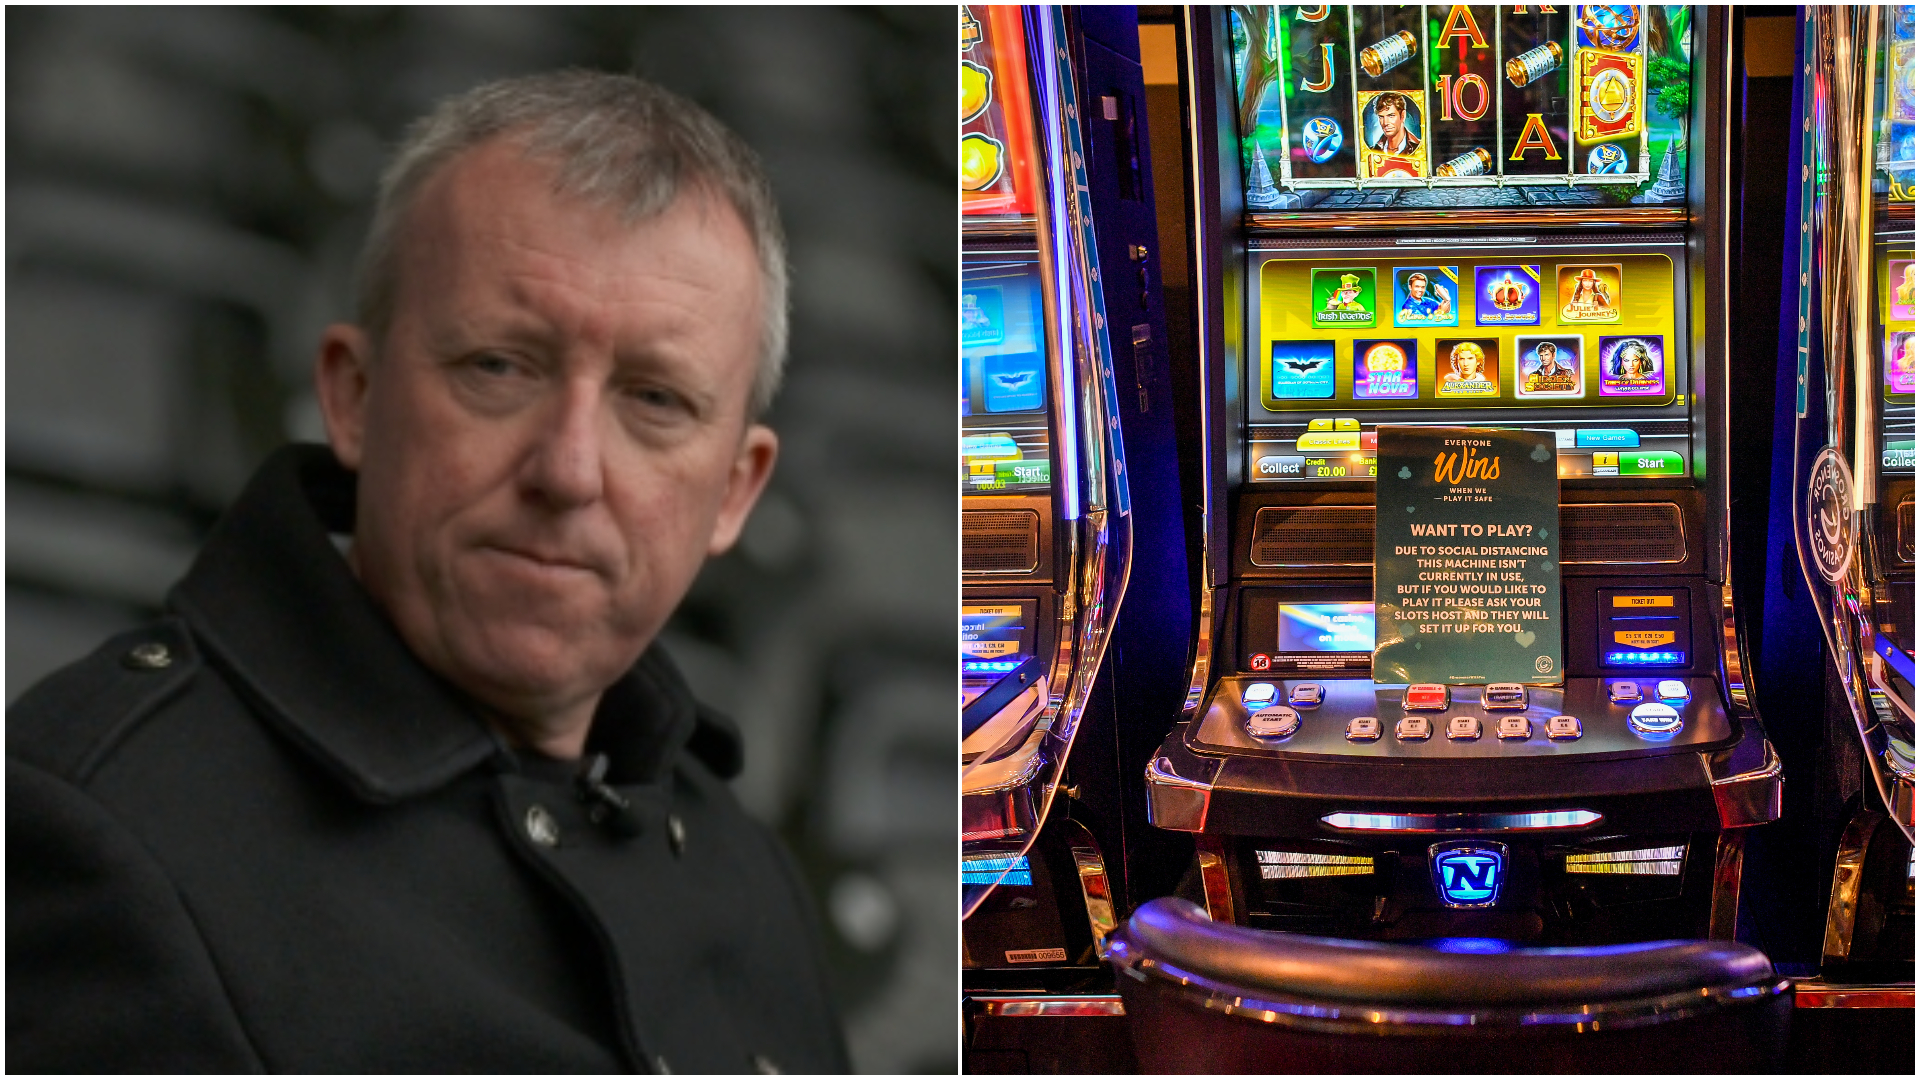 Former gambling addict who lost his home became so hooked he tried to bet £25,000 in one go ITV News Wales